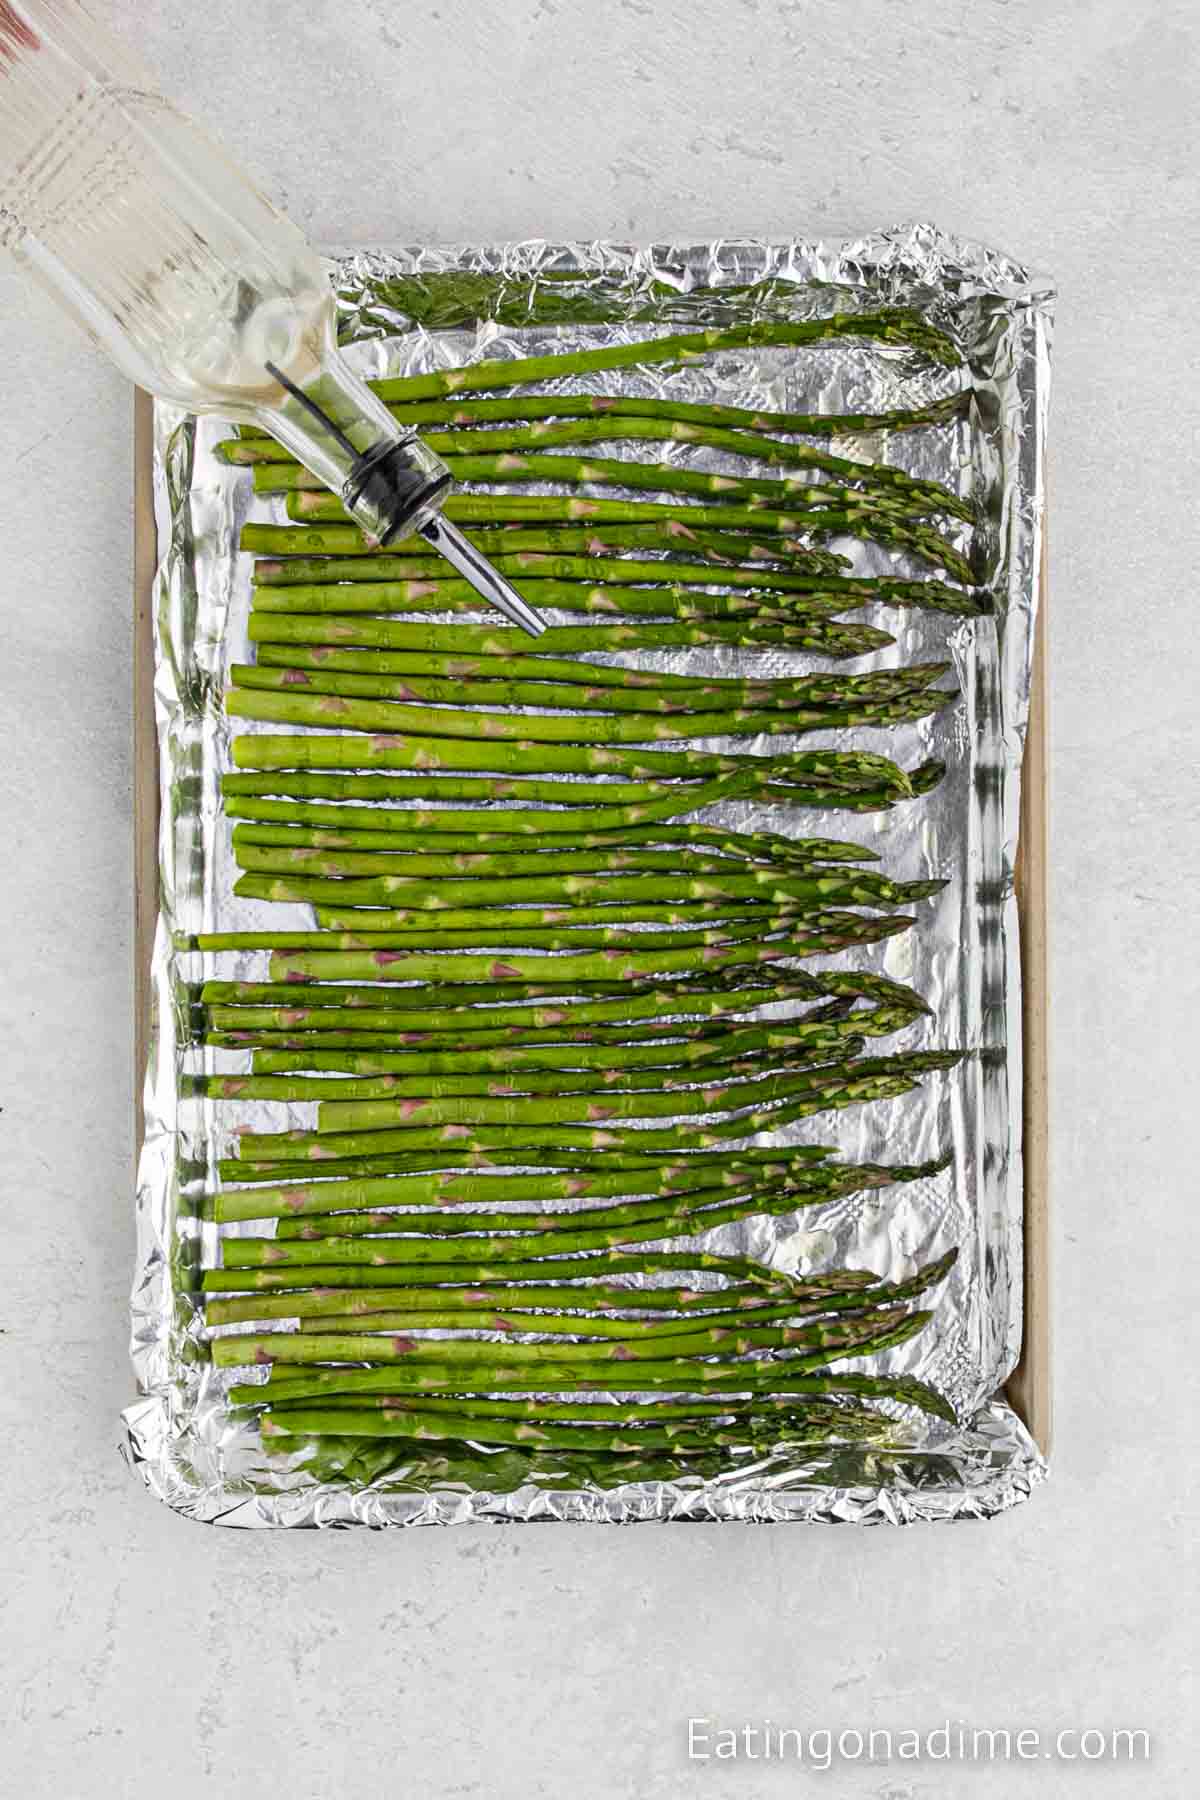 Drizzling oil over the asparagus on a baking sheet